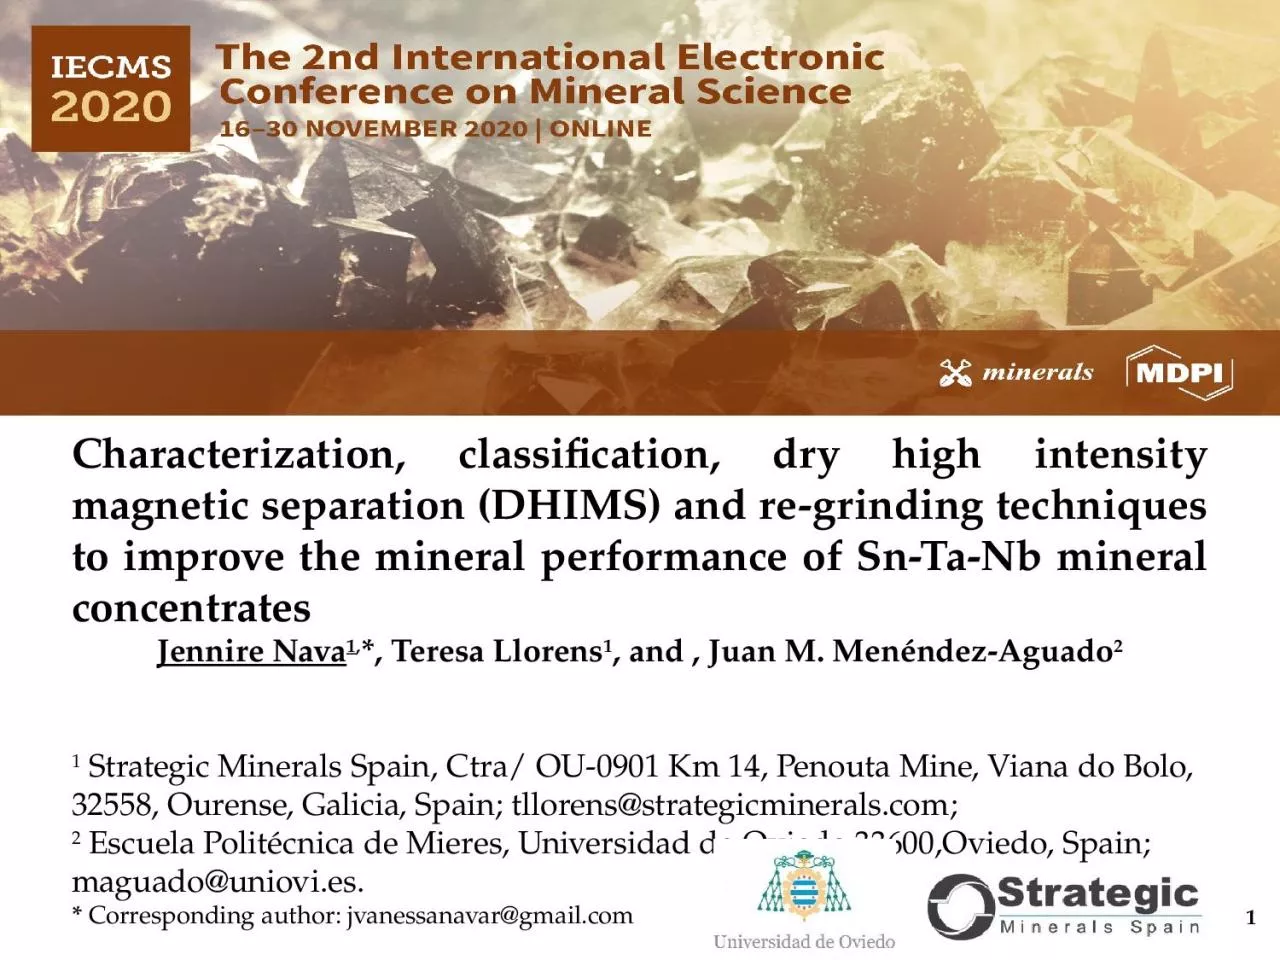 Characterization, classification, dry high intensity magnetic separation (DHIMS) and re-grinding